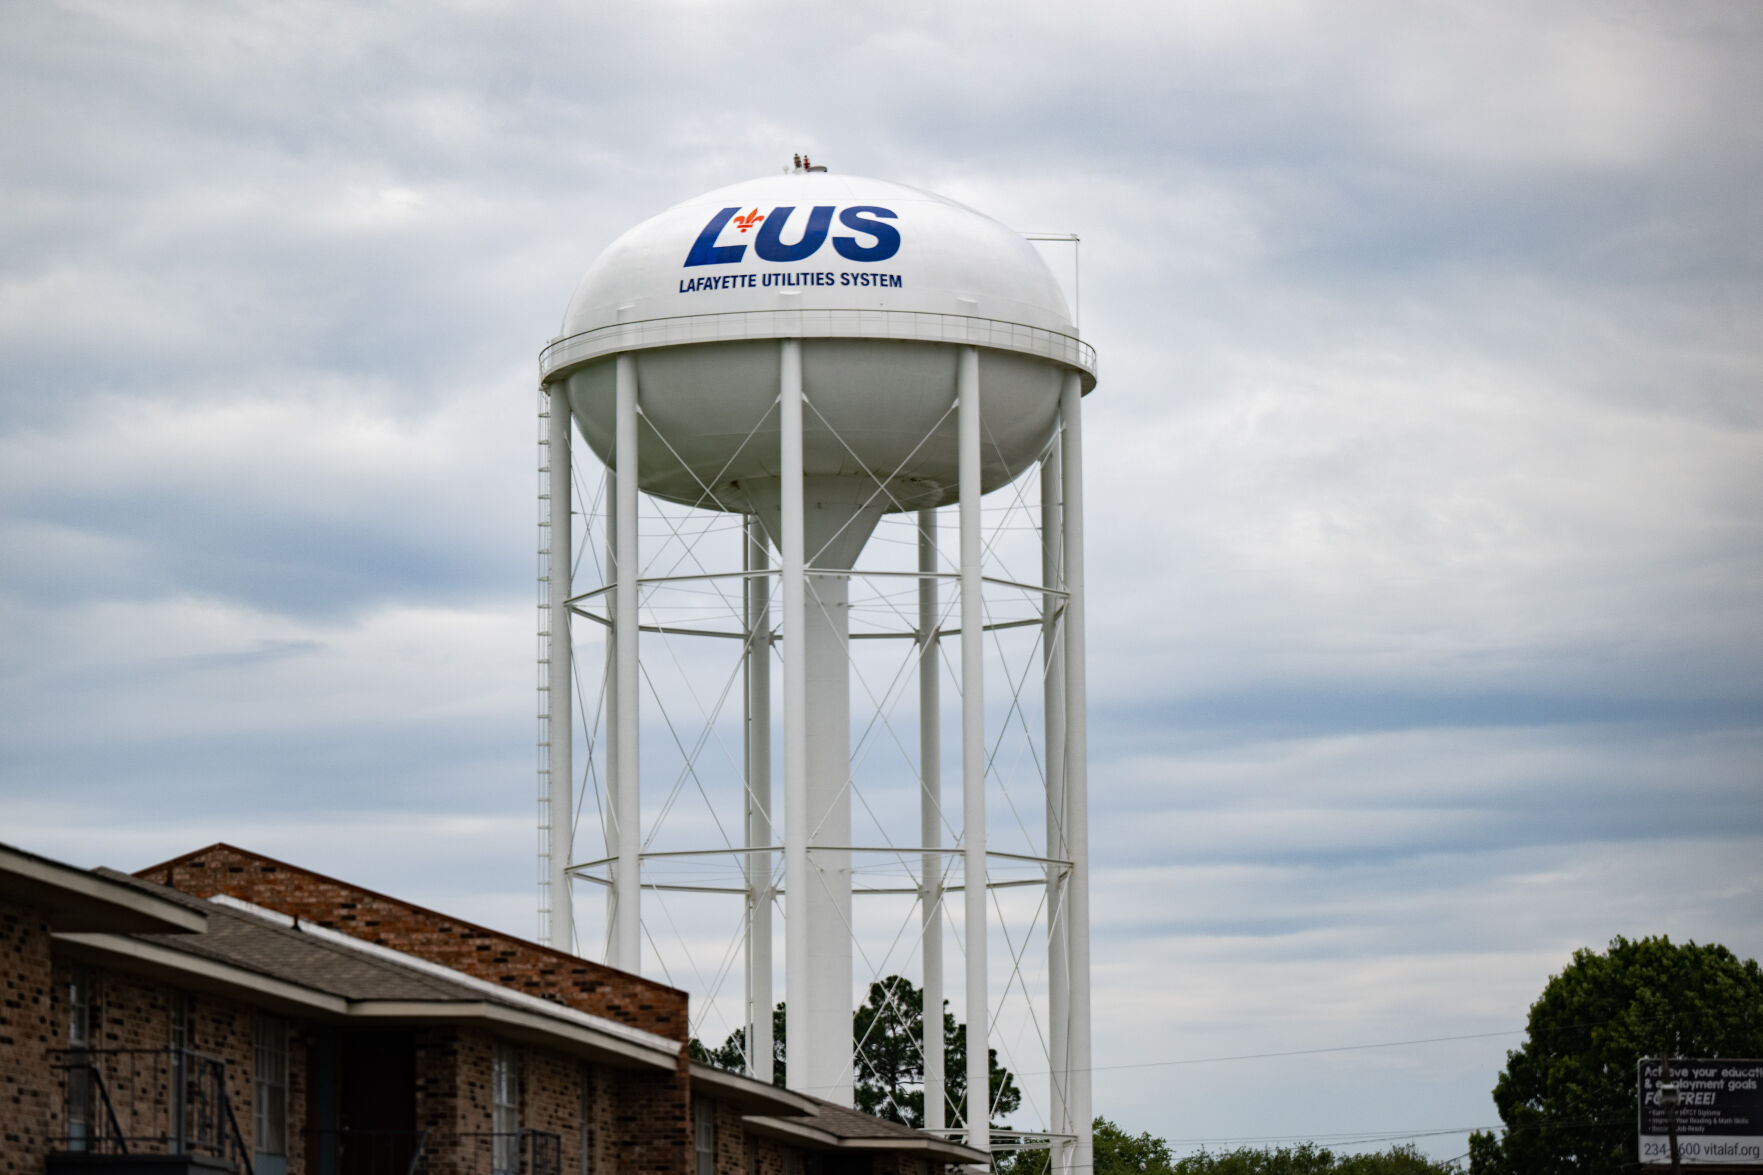 Water towers serve function other than advertisement | Acadiana